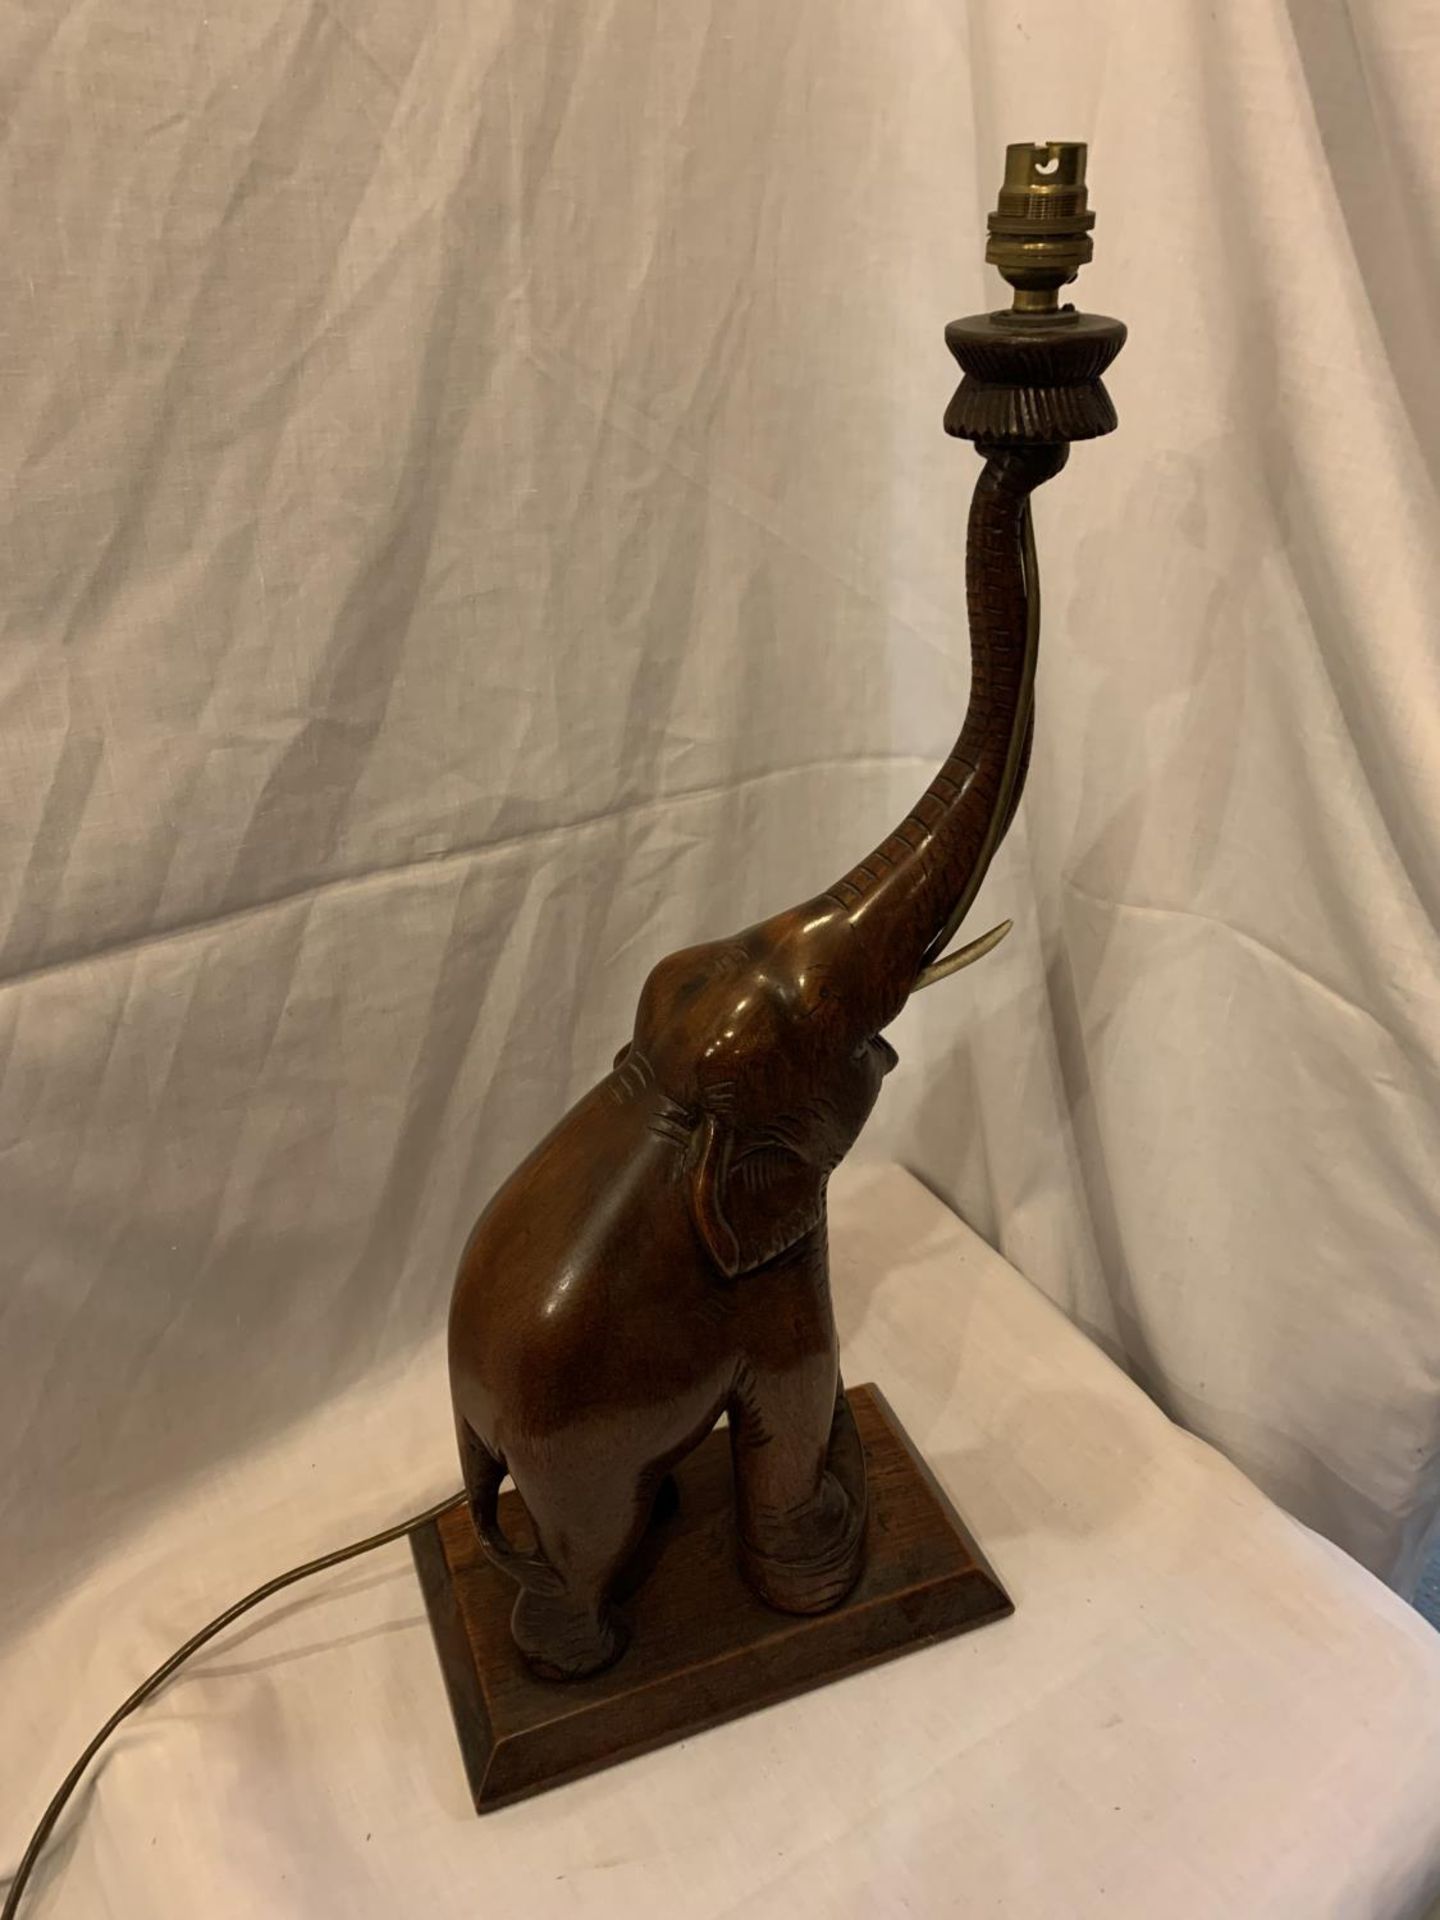 A WOODEN ELEPHANT DESIGN TABLE LAMP - Image 4 of 5